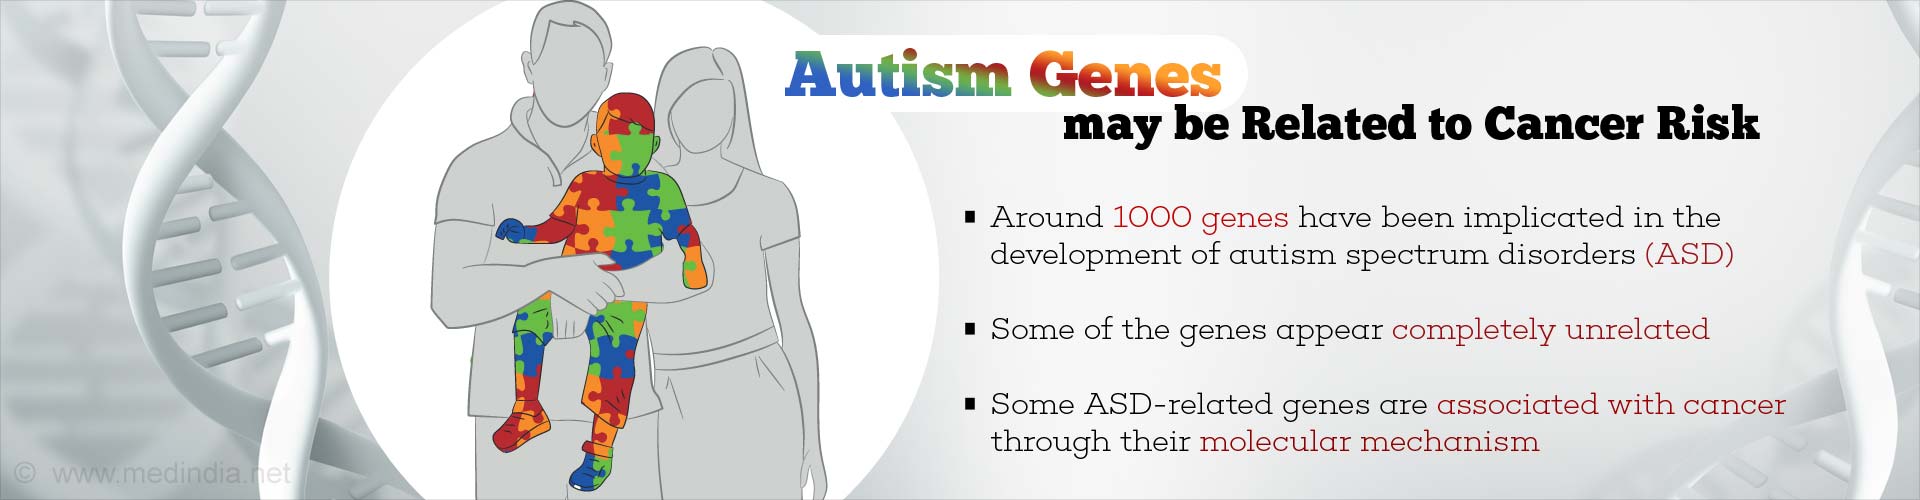 Autism genes may be related to cancer risk
- Around 100 genes have been implicated in the development of autism soectrum diseases (ASD)
- Some of the gene appear completely unrelated
- Some ASD-related genes are associated with cancer through their molecular mechanism